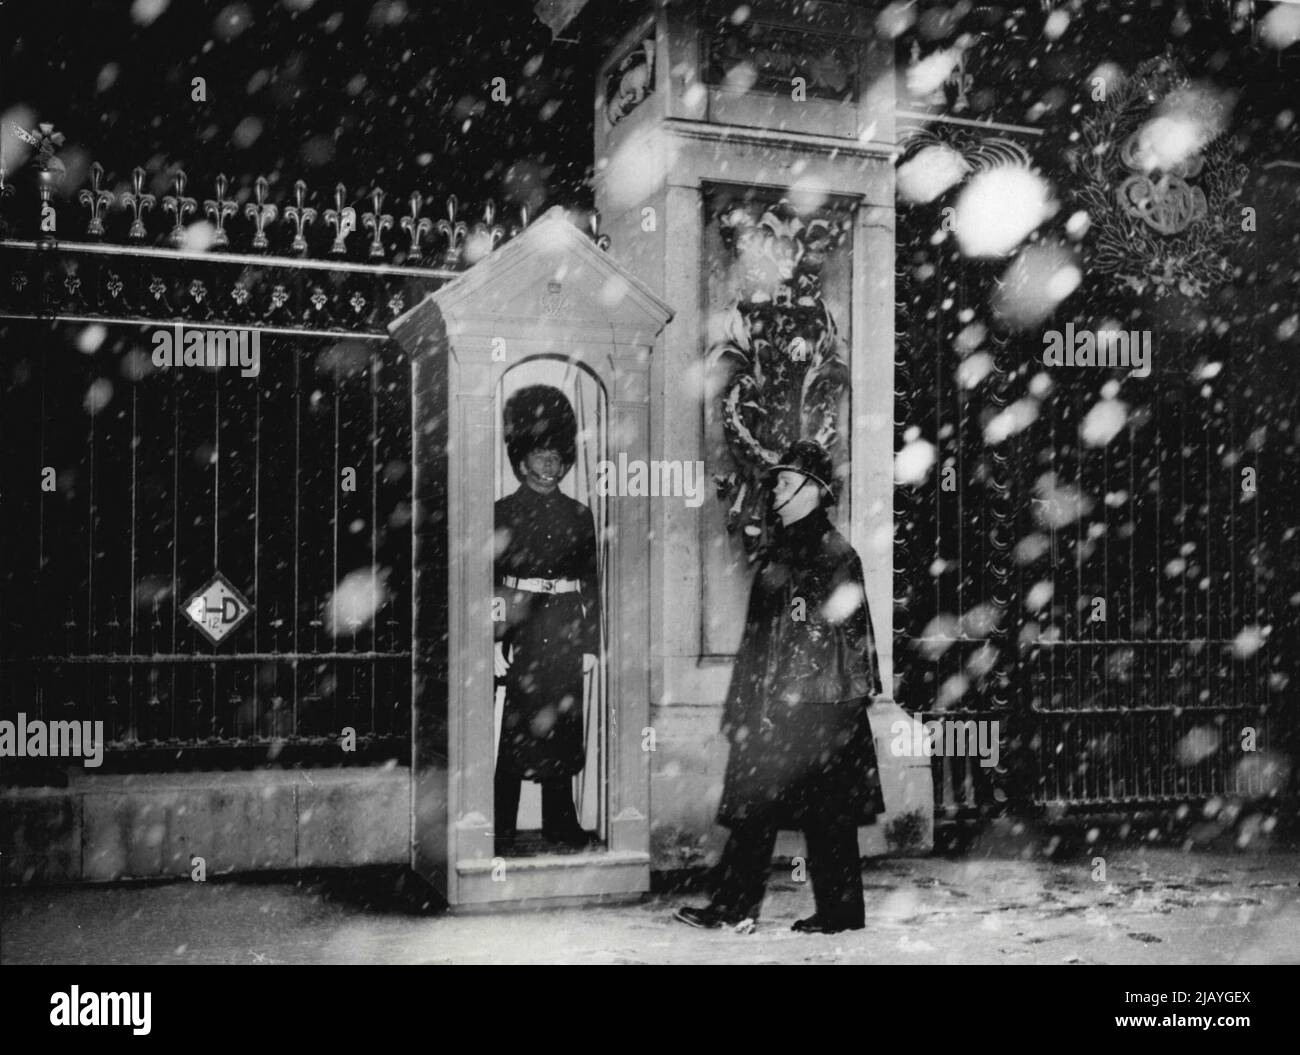 His Regiment Has Just Returned From Malaya - A policeman wales past the sentry in his box outside Buckingham Palace, today Dec 4th, at 3.30 p.m., during London's first heavy fall of snow. The guard is of the 2nd battalion coldstream guards, which has just returned from service in Malaya, and is now carrying out guard duty at the Palace. December 4, 1950. (Photo by Associated Press Photo). Stock Photo